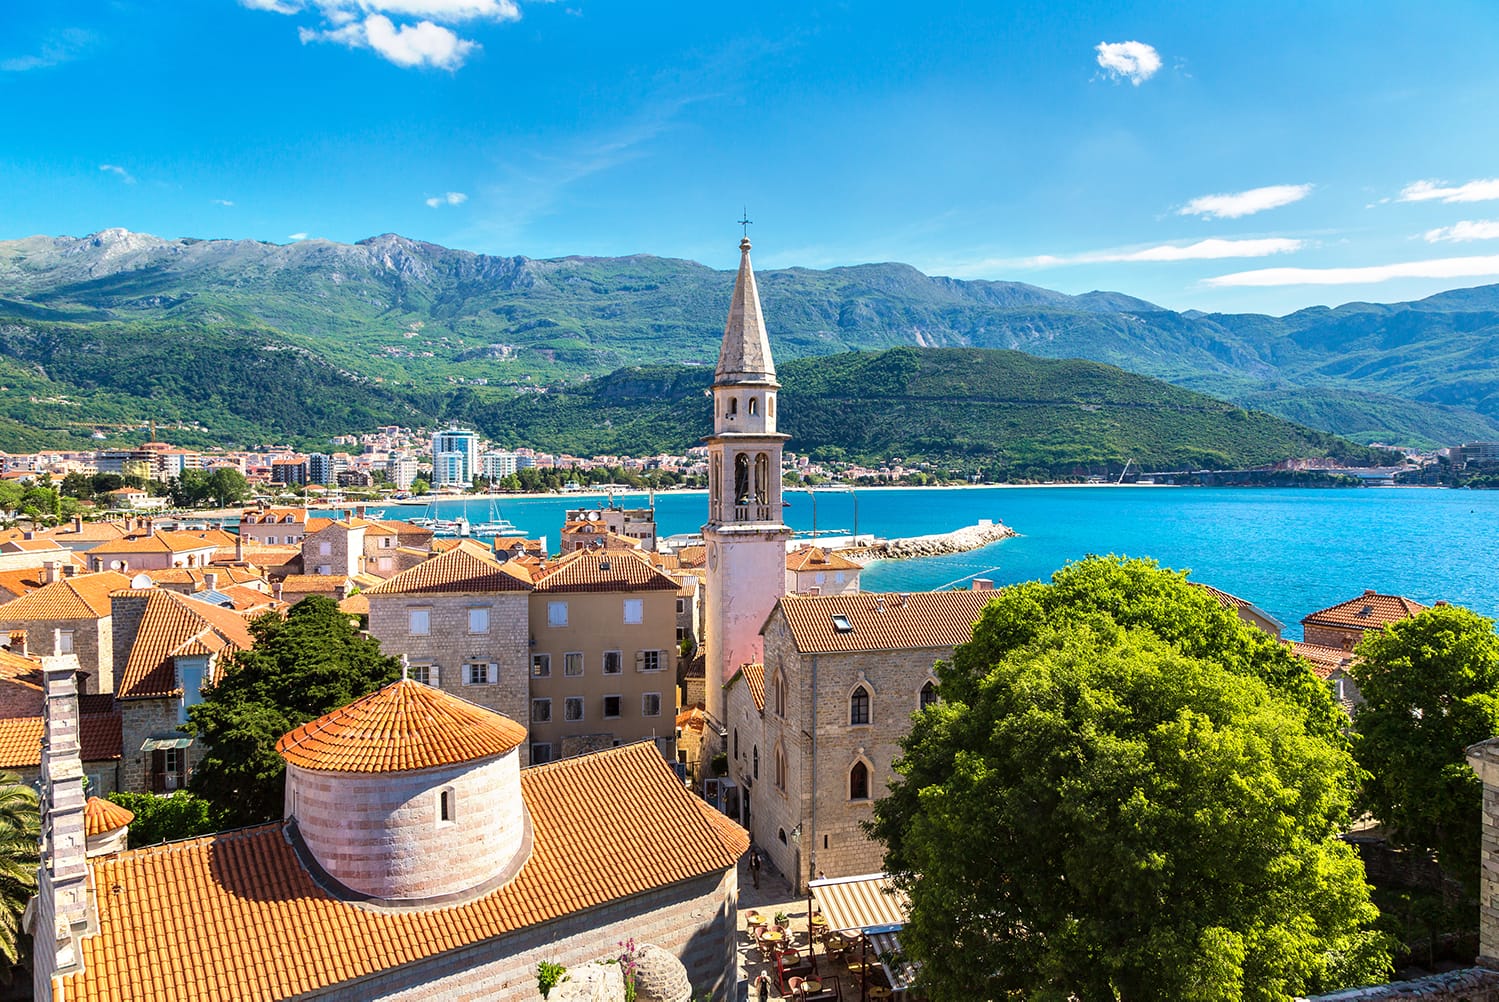 Old town in Budva in a beautiful summer day, Montenegro